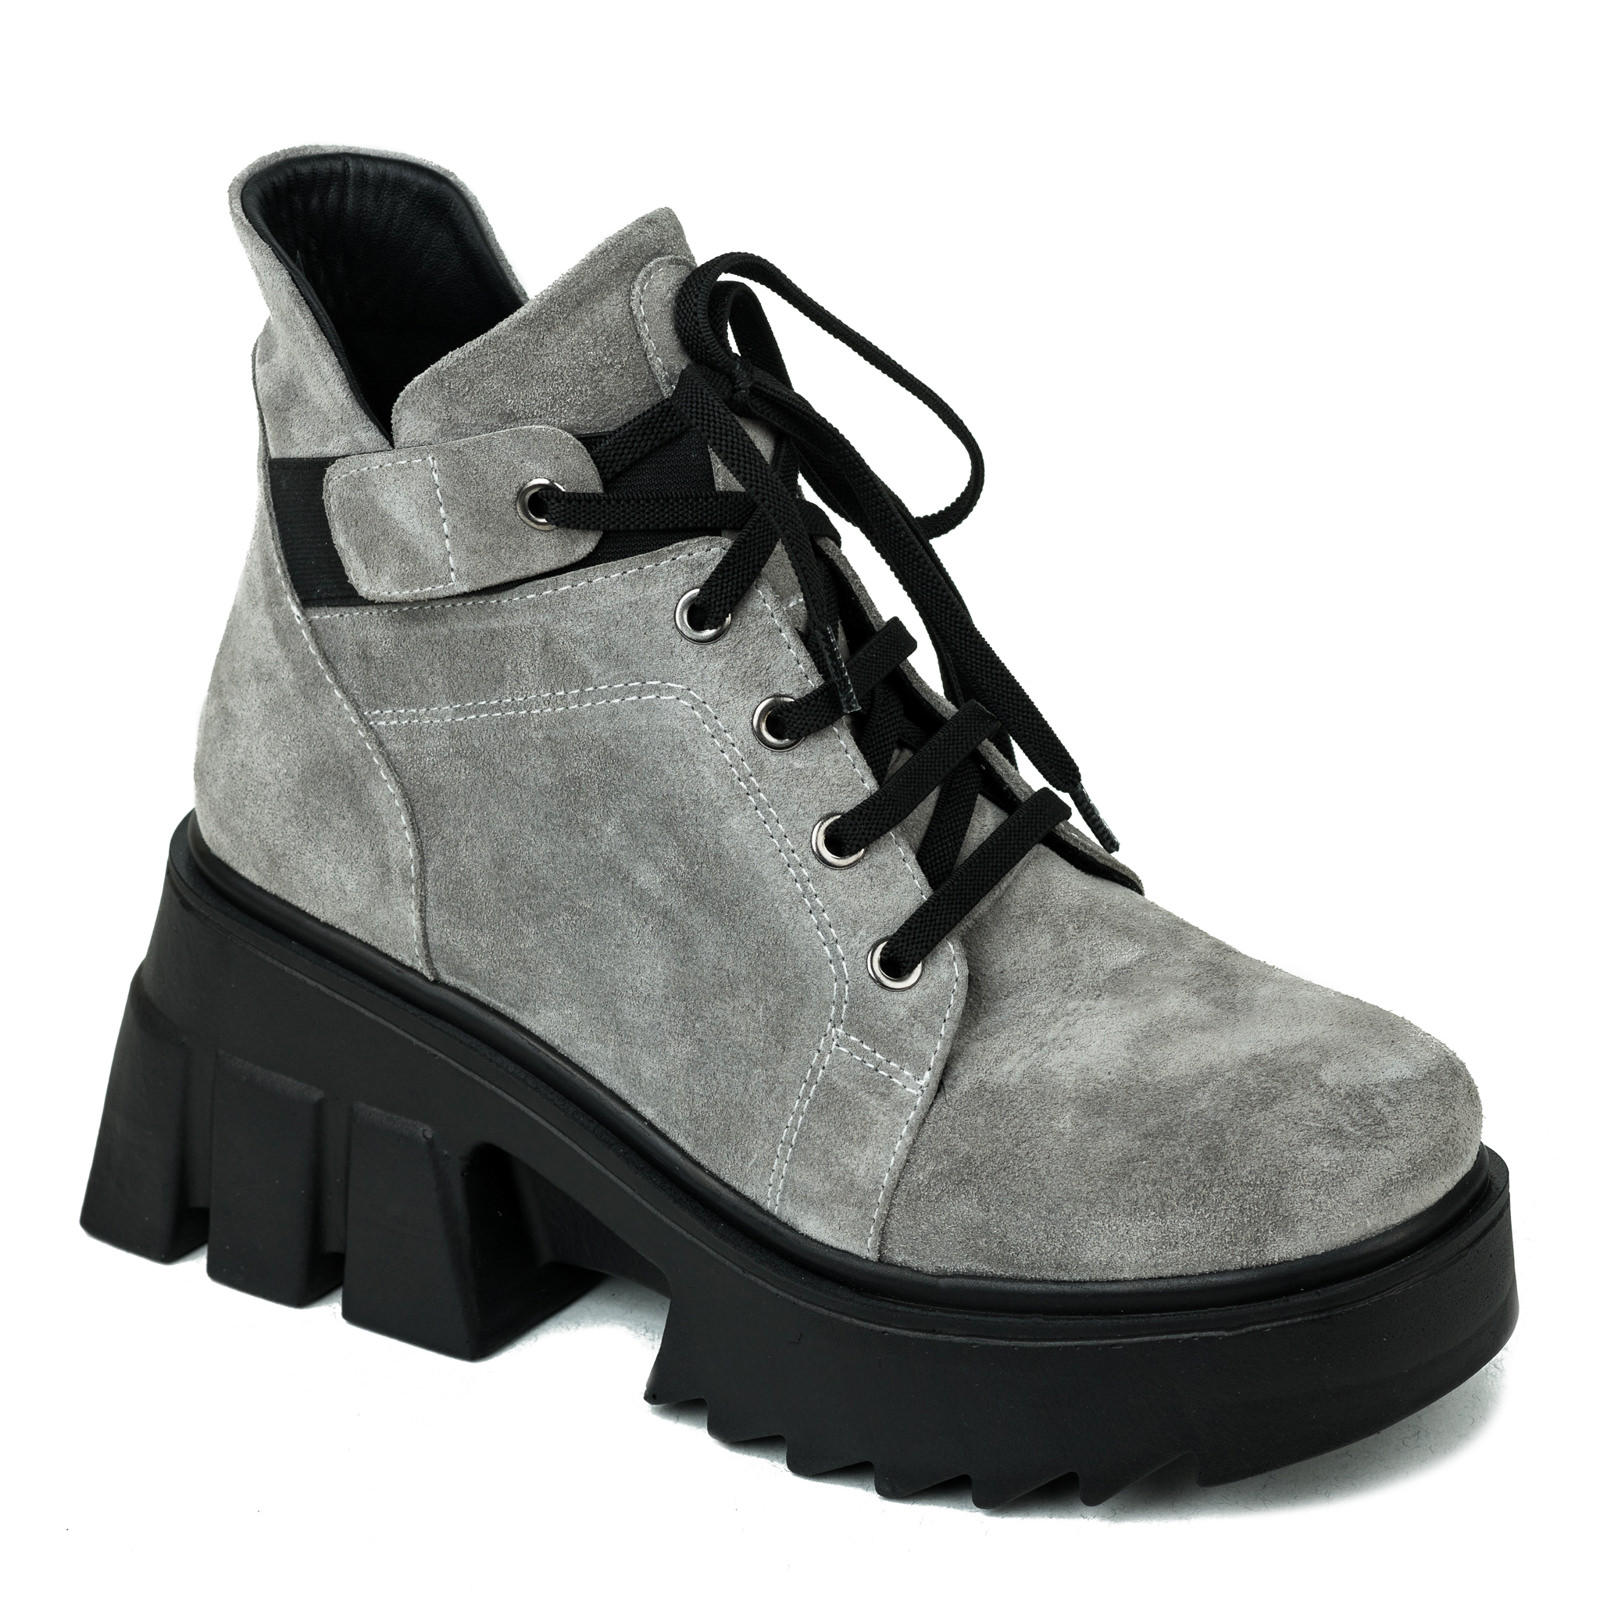 Leather ankle boots B041 - GREY